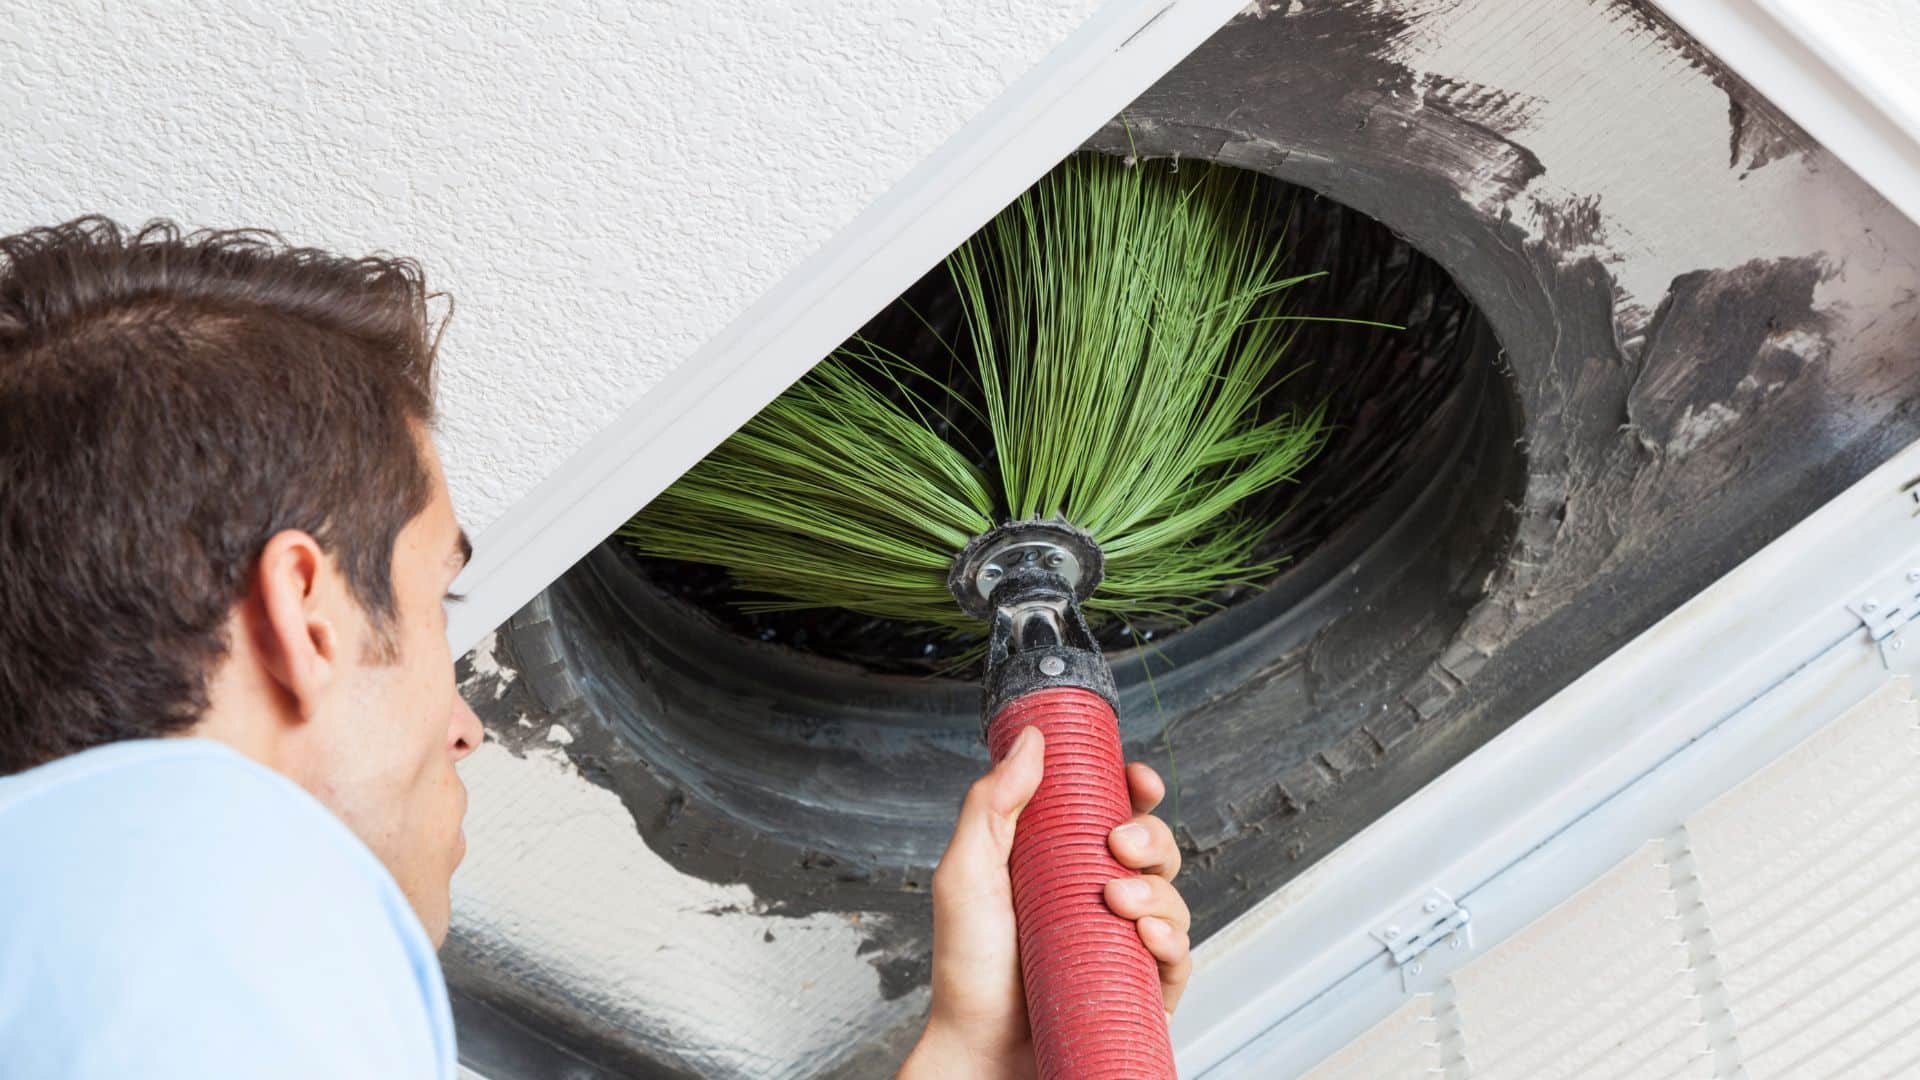 Vent Cleaners LA: Your trusted choice for top-quality vent cleaning in Los Angeles. We prioritize healthy indoor air with quick, affordable services for homes and businesses.